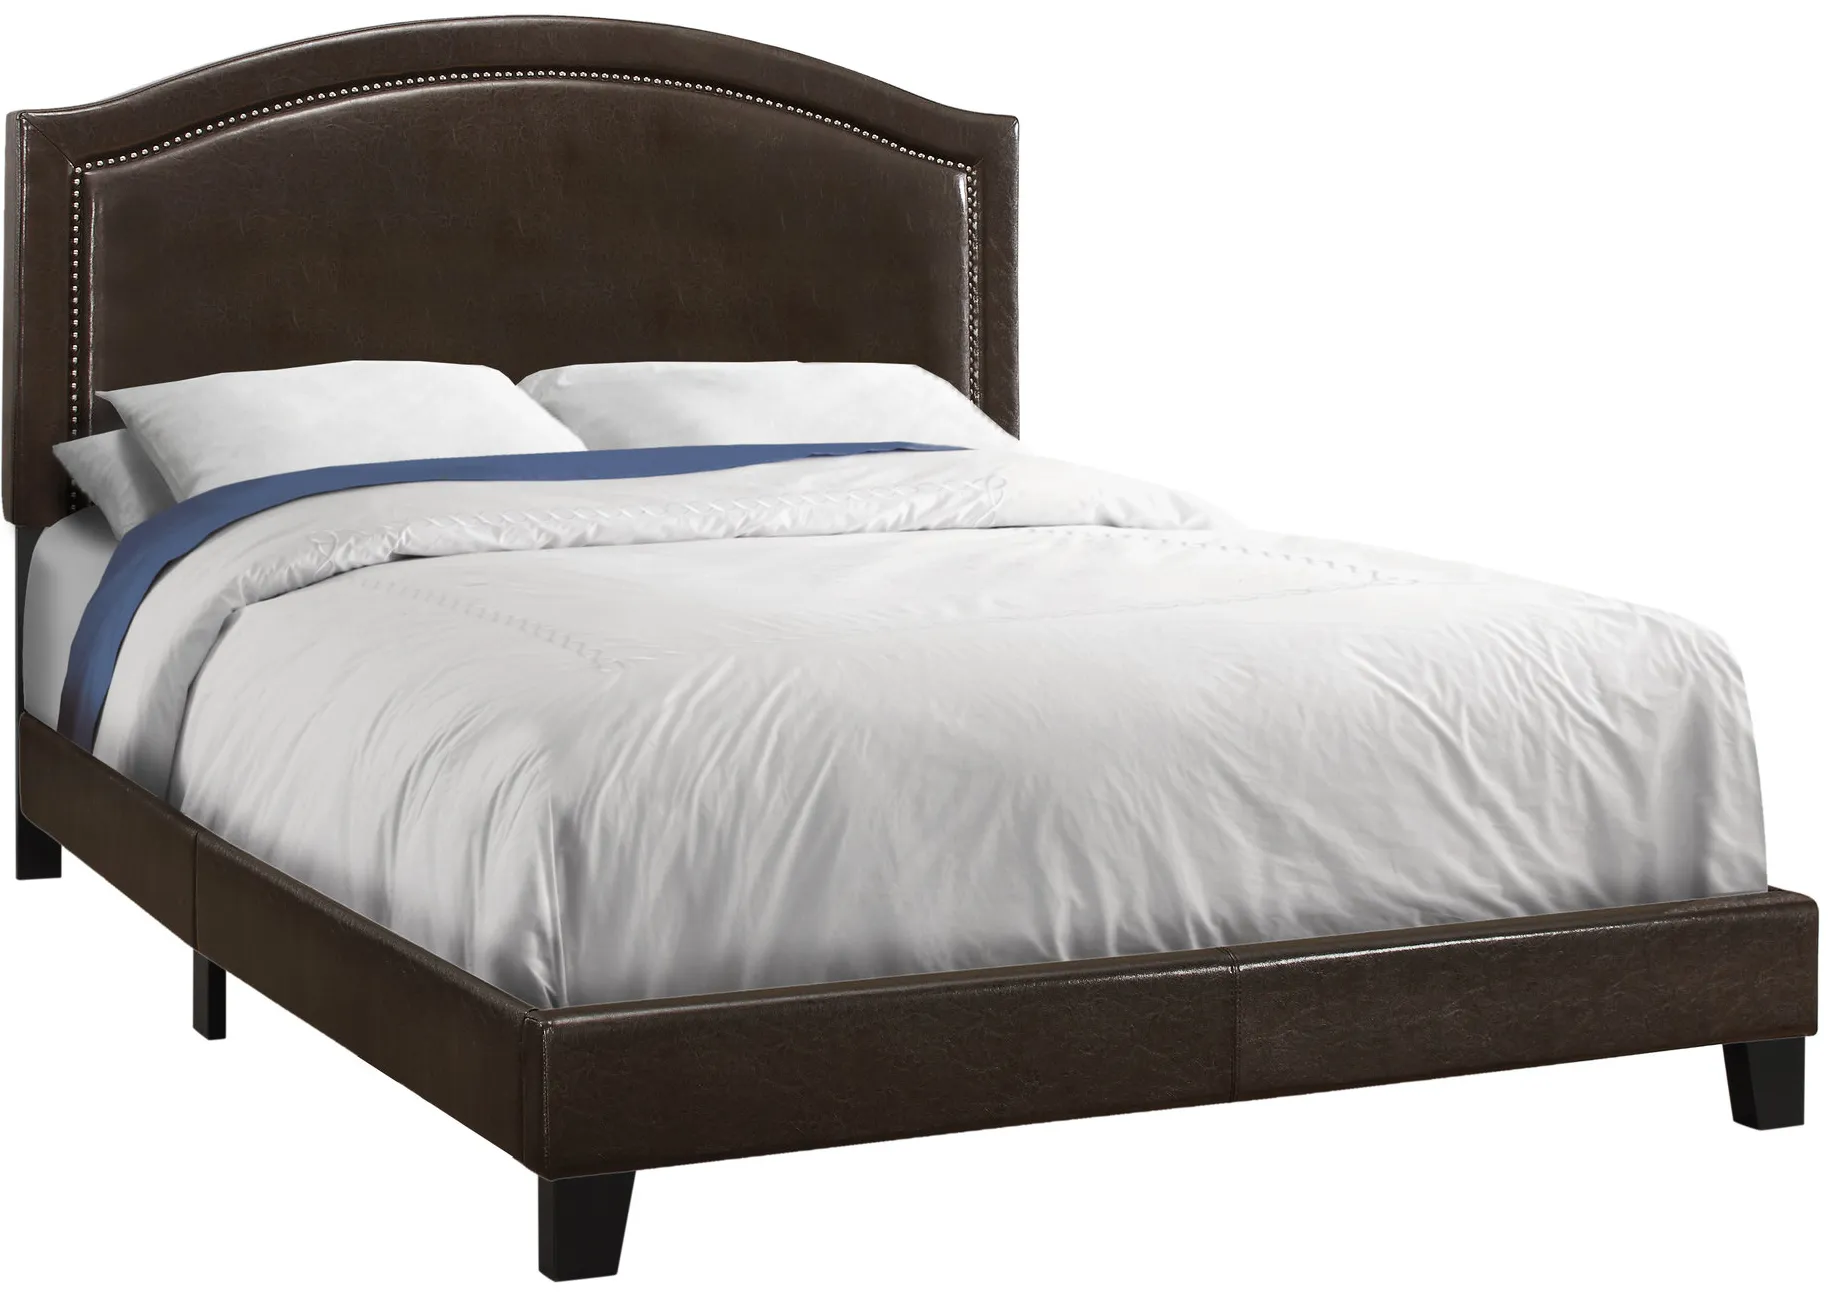 Bed, Queen Size, Platform, Bedroom, Frame, Upholstered, Pu Leather Look, Wood Legs, Brown, Transitional